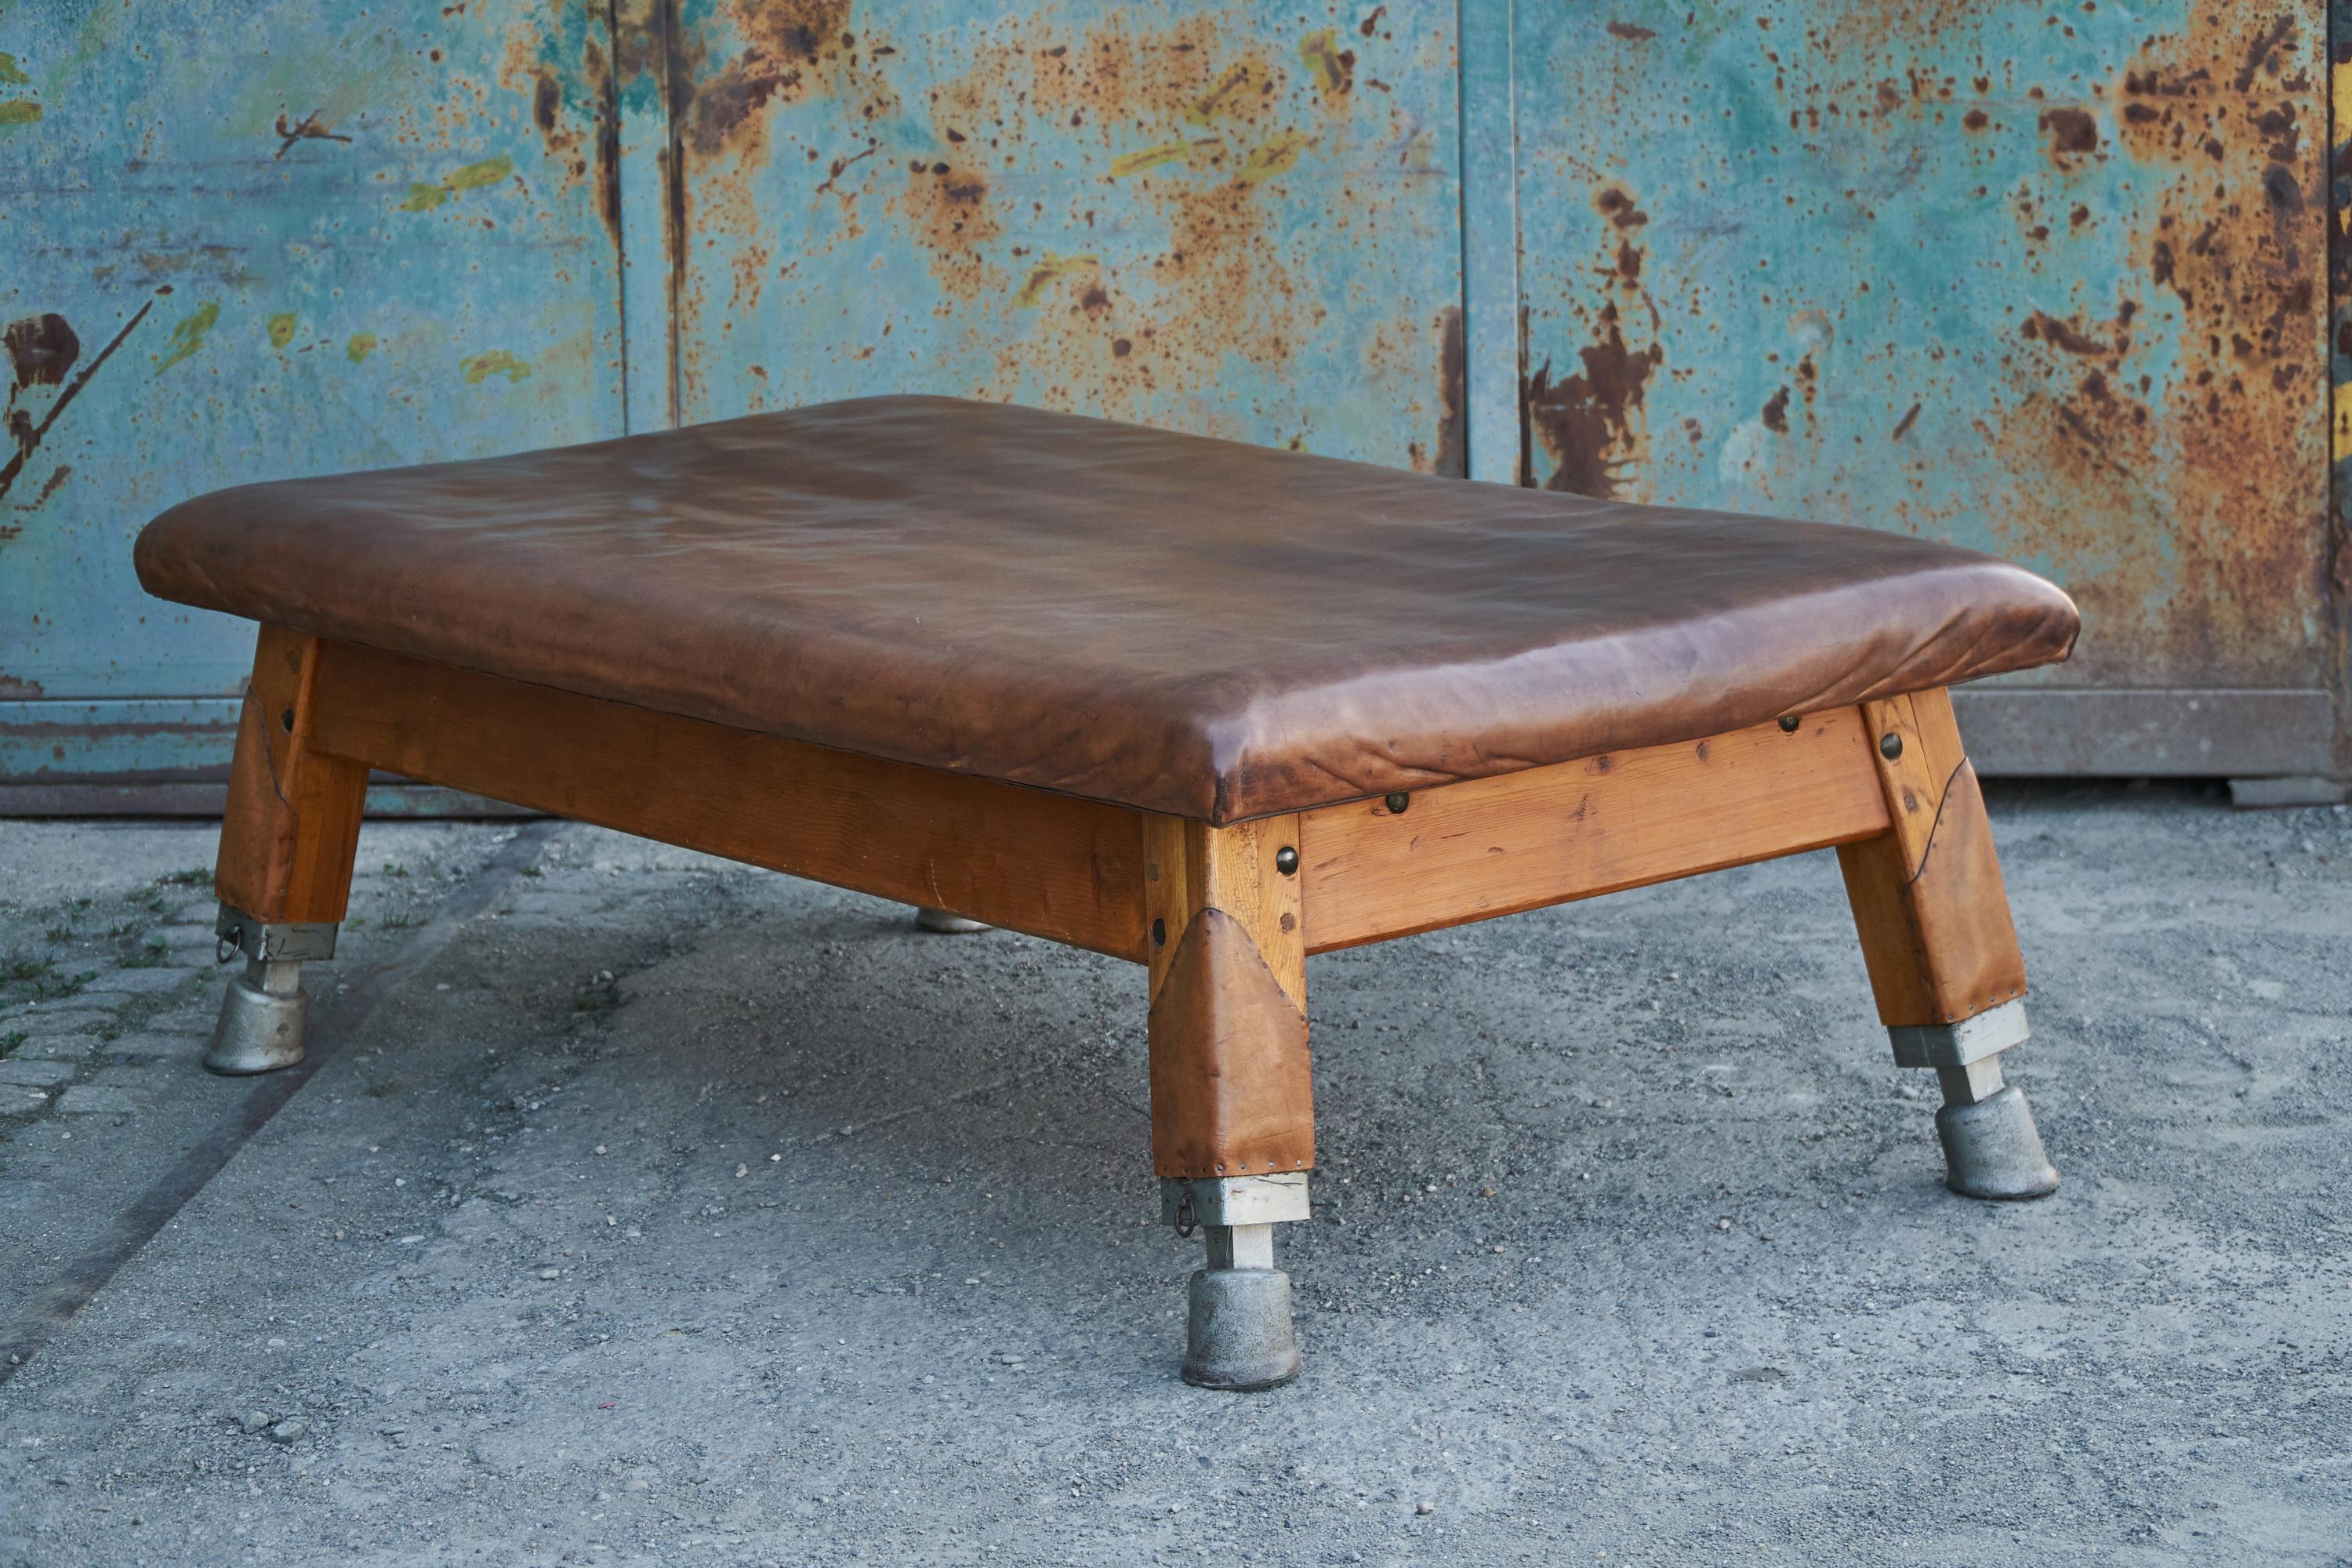 This old tournament table from a Czech school sports hall was cut to a height of 58cm. The leather was cleaned and preserved. The wooden parts restored. The thick cow leather on the top is in good condition. Completely restored.